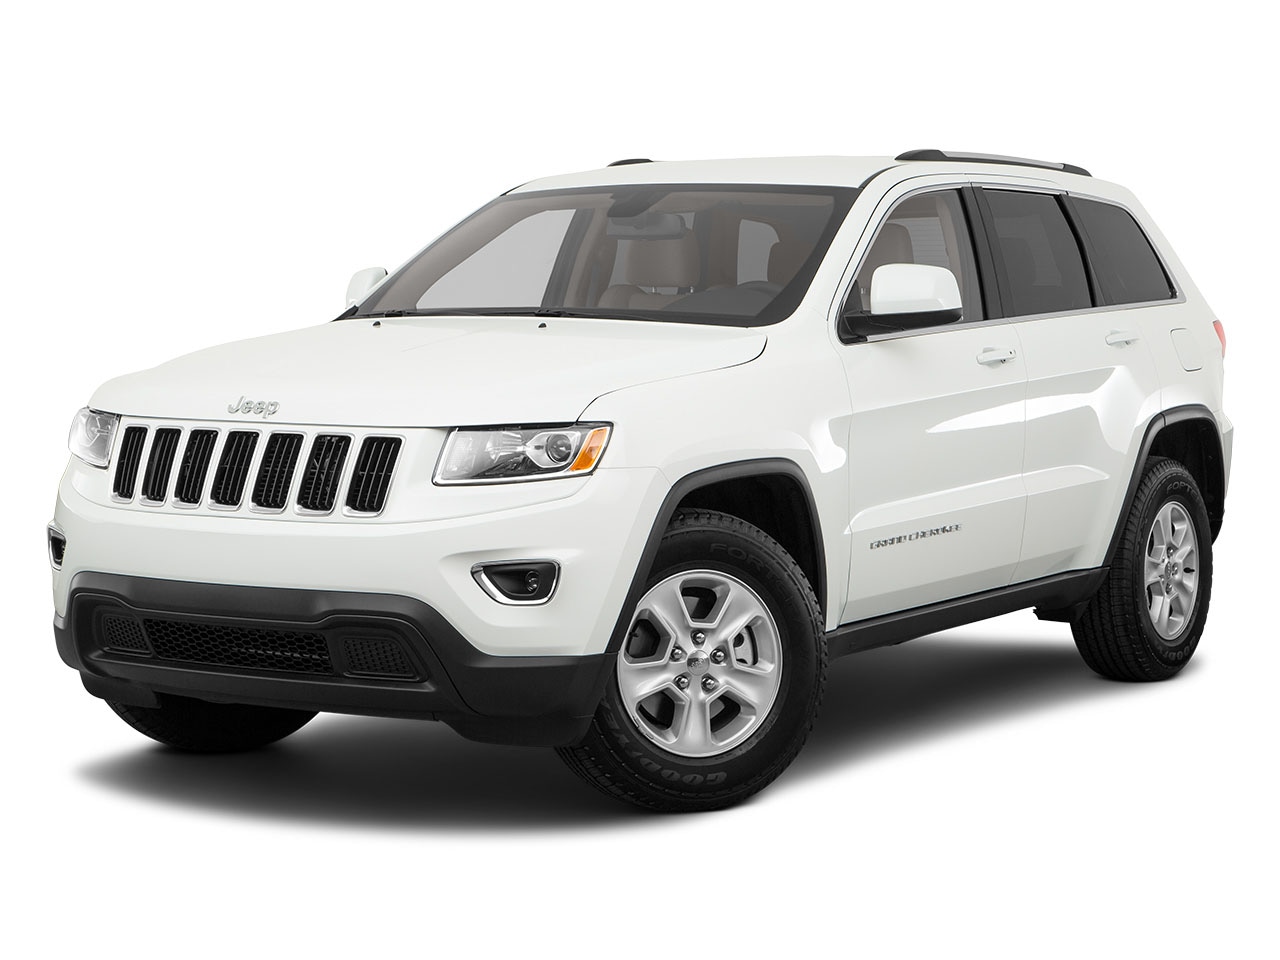 Jeep Grand Cherokee 2014 PNG